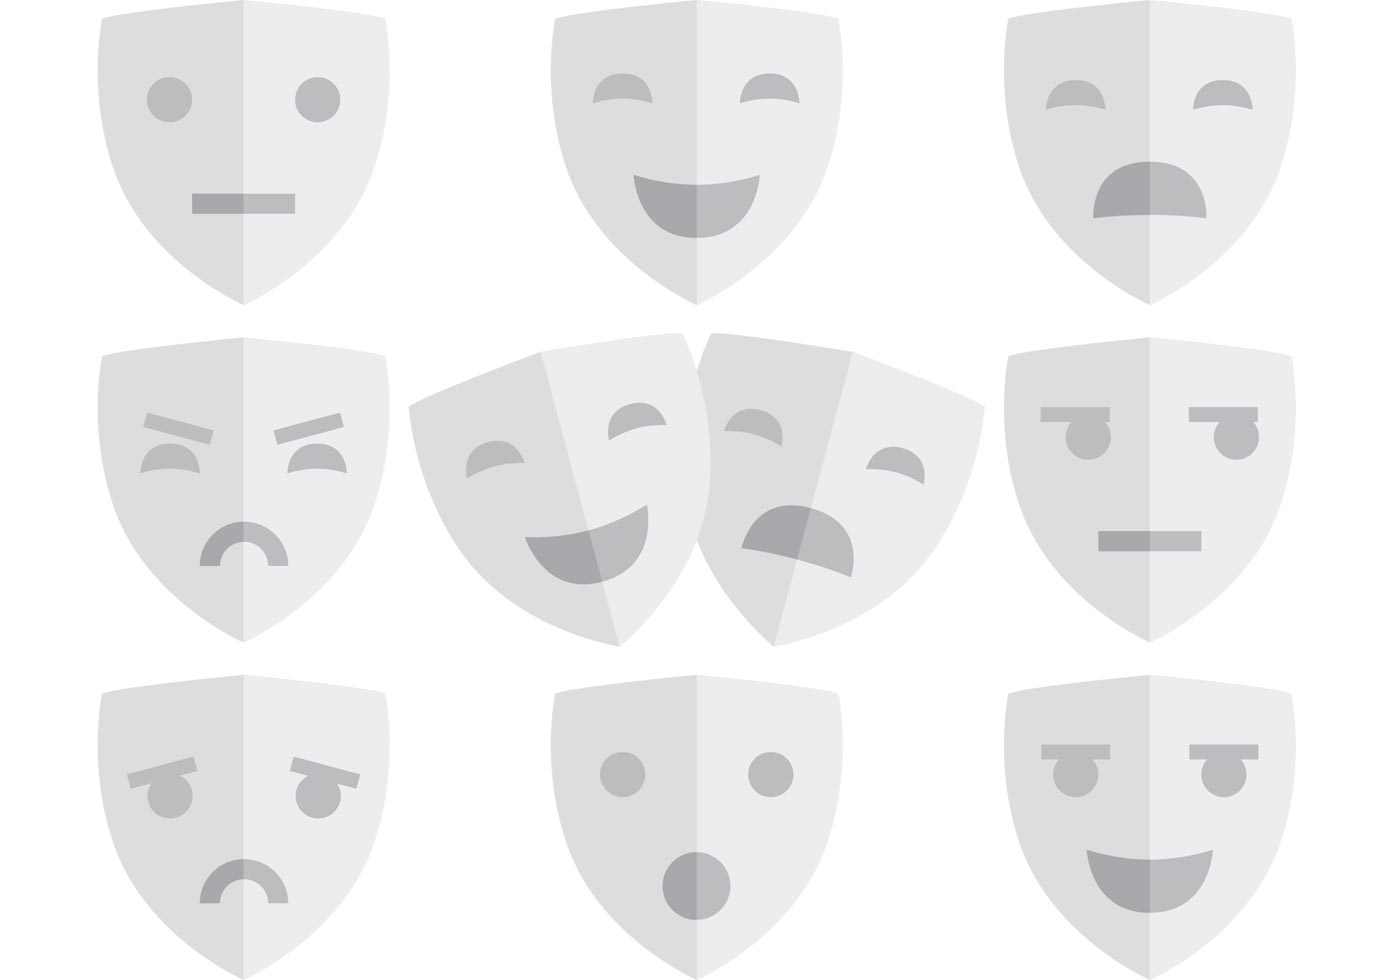 Turist Bror mørkere Theater Mask Vector Art, Icons, and Graphics for Free Download